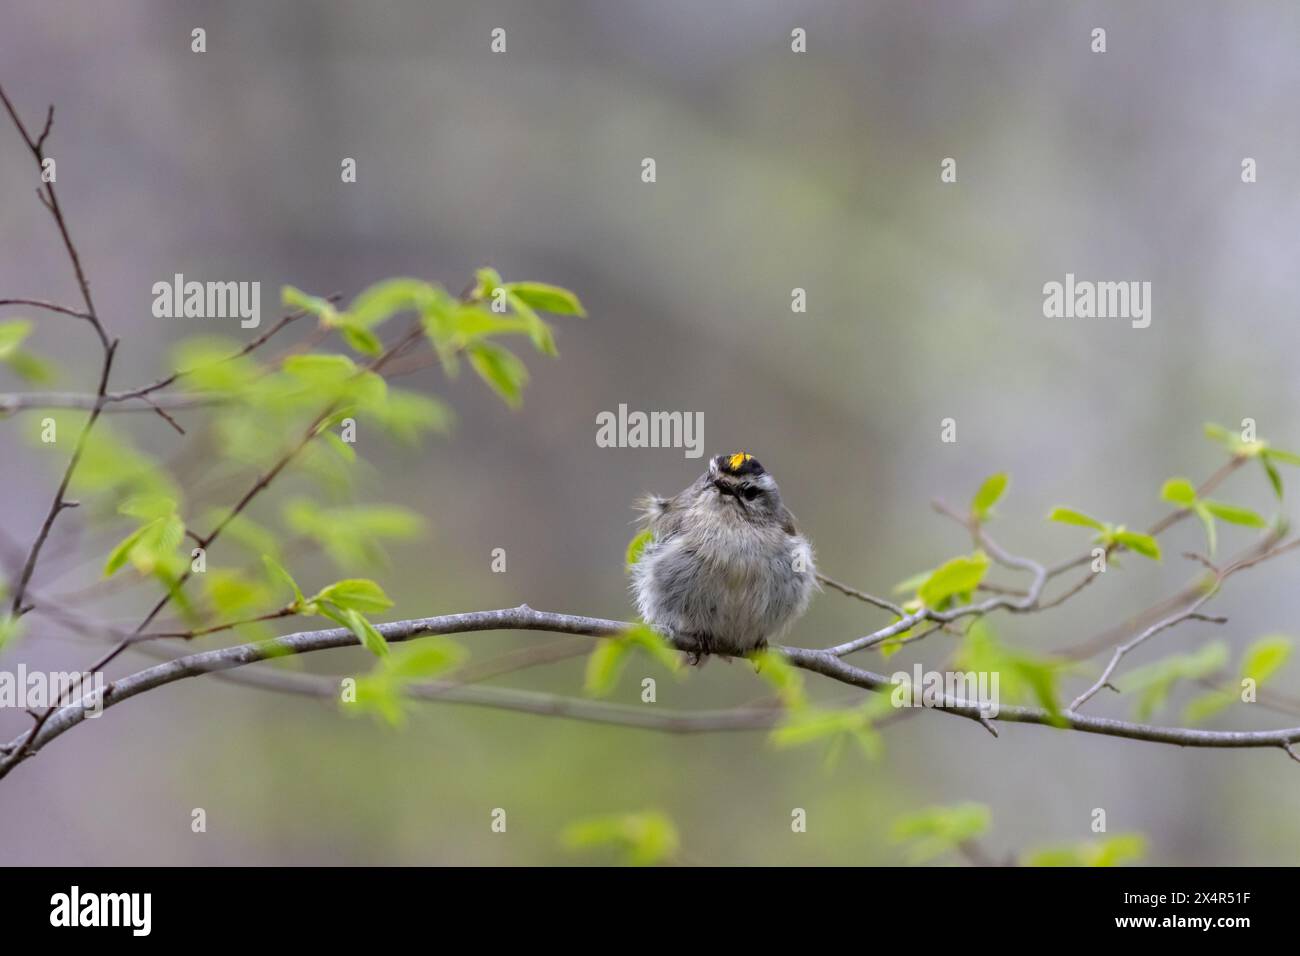 Golden Crowned Kinglet,  Regulus satrapa, one of the smallest songbirds, perched with puffed feathers on branch gray background copy text Stock Photo